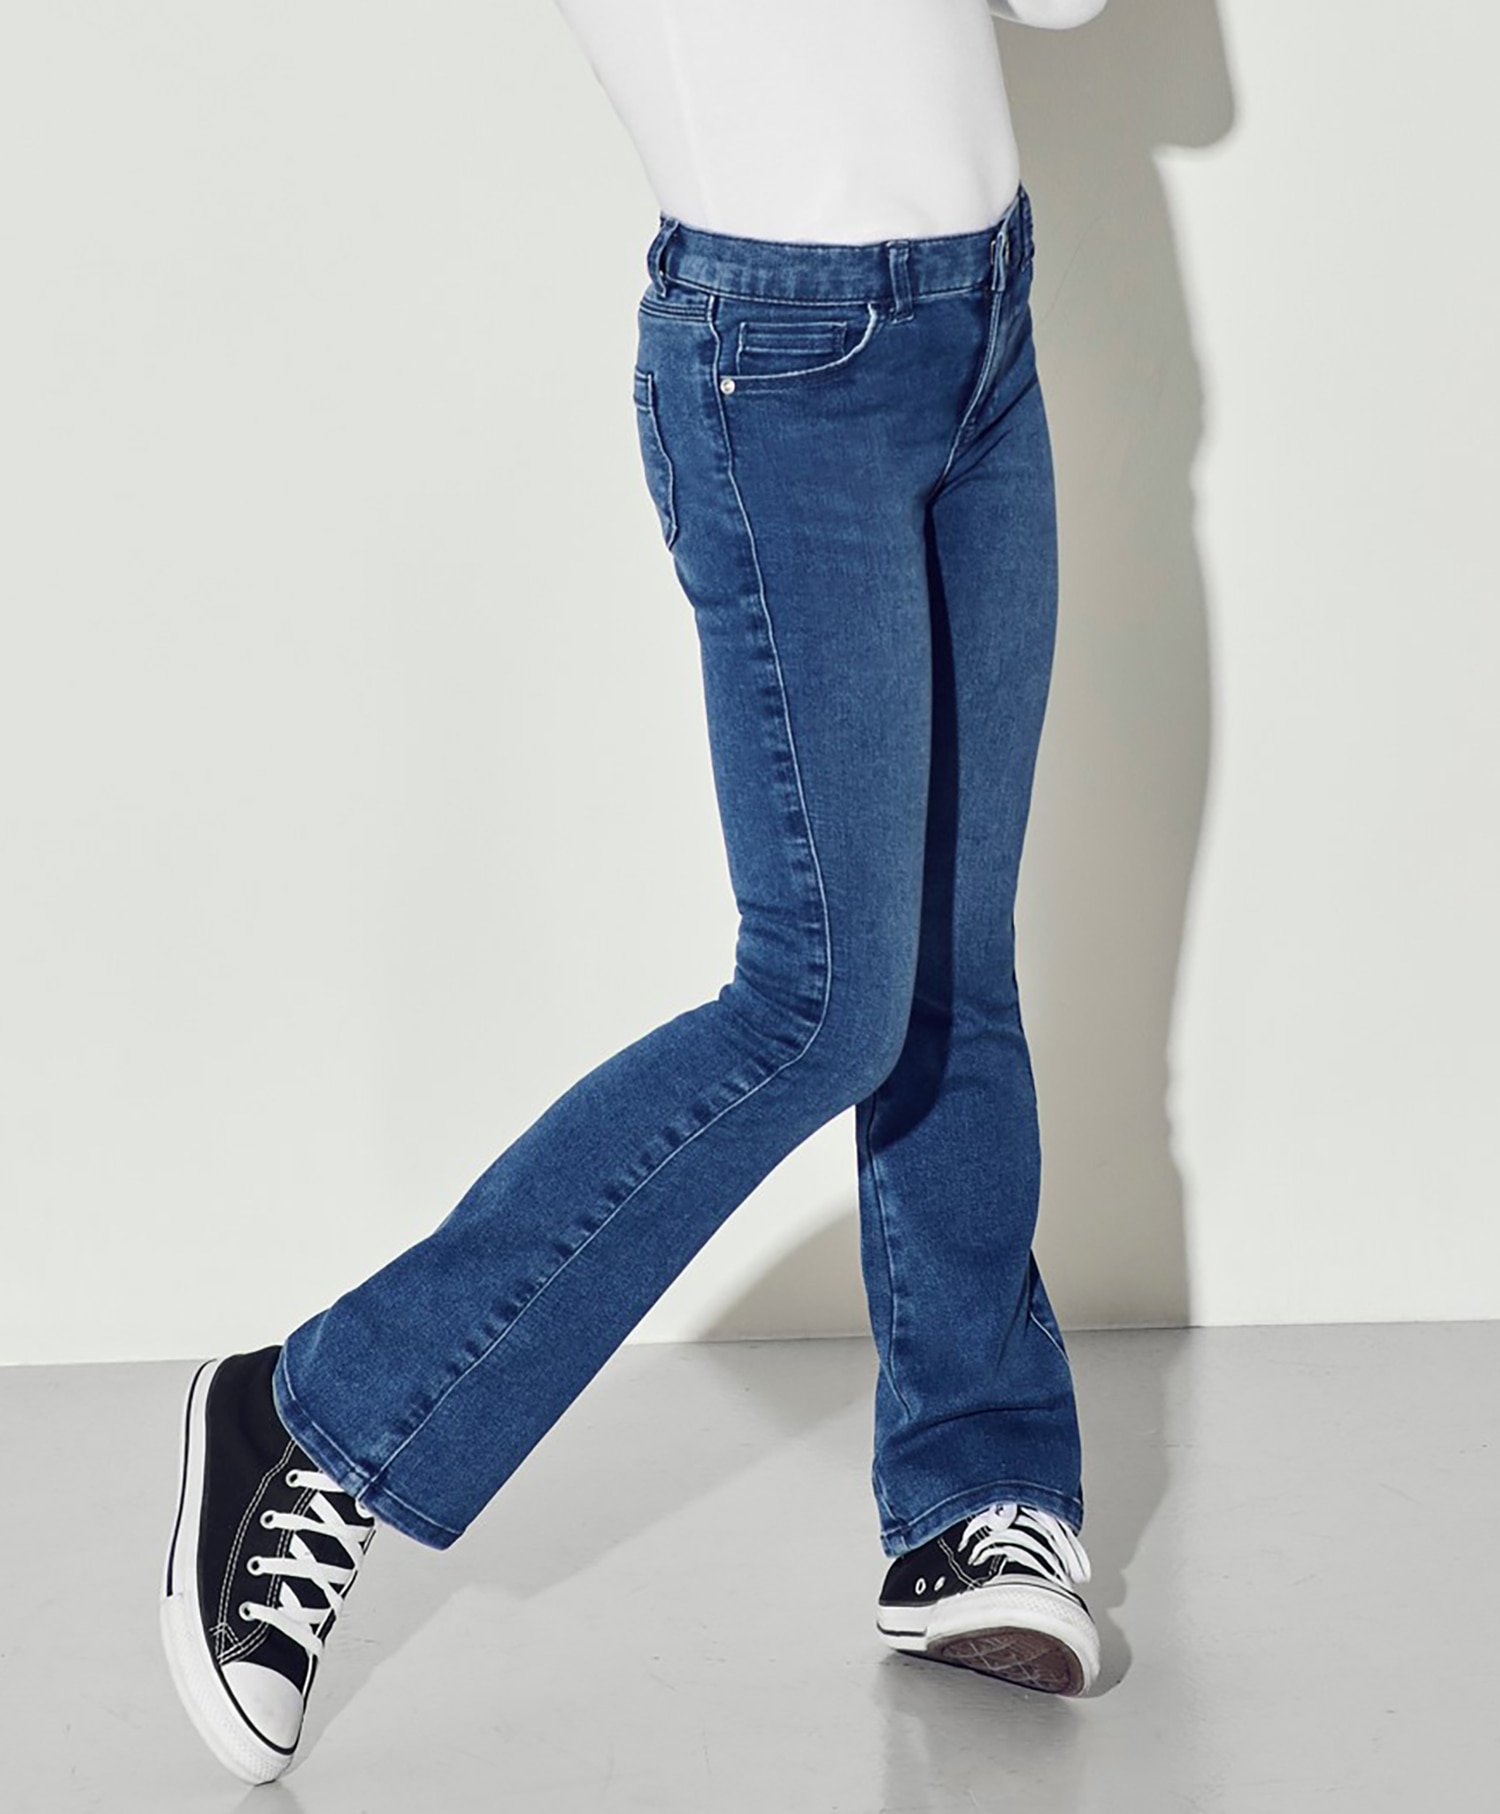 Only KIDS Flared Jeans